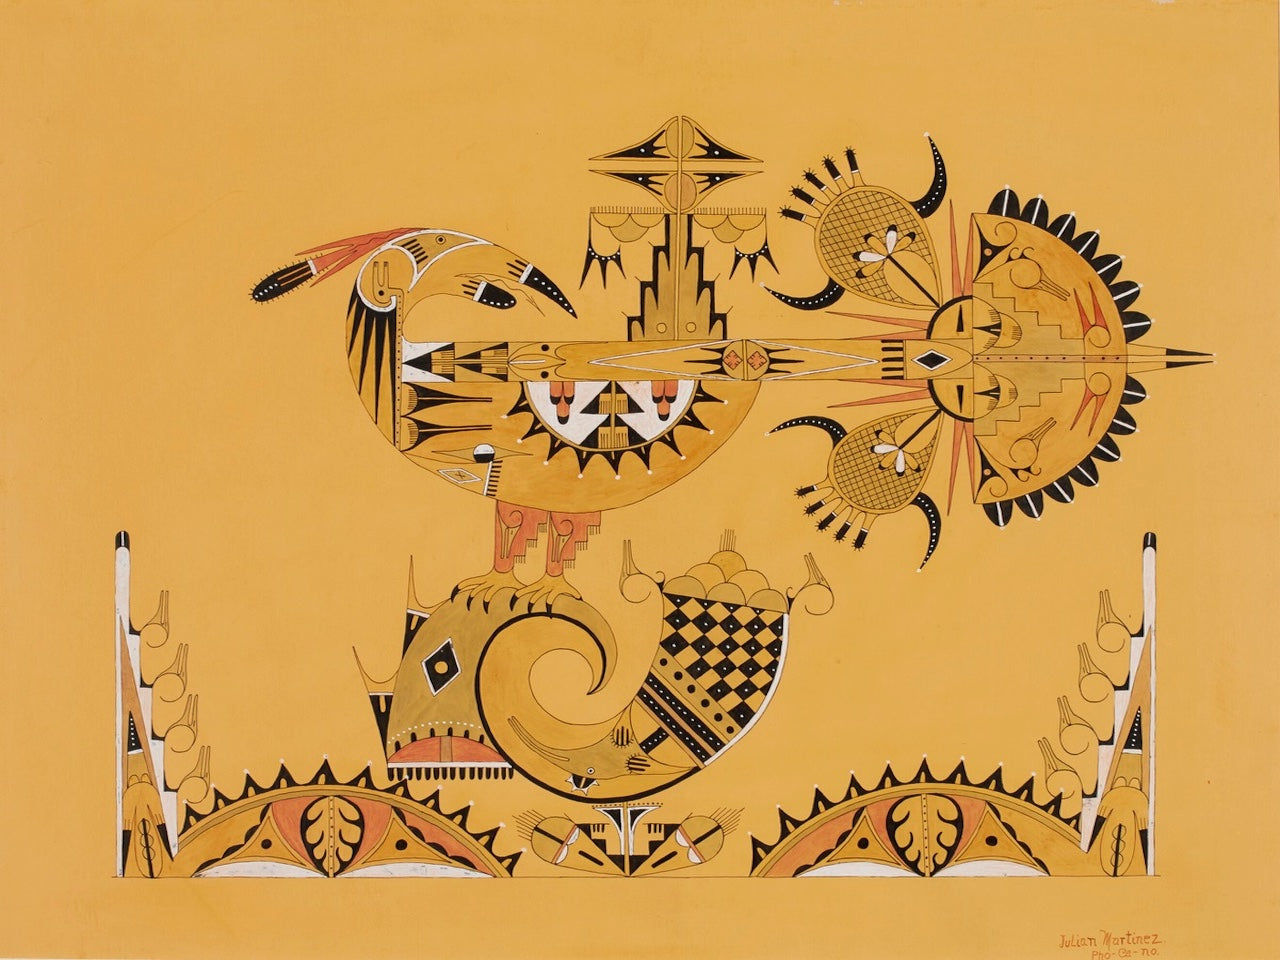 Julian Martinez, San Ildefonso Pueblo,1879-1943; Pottery Design, early 20th century. Watercolor and ink on paper, 20 12 x 25 916 in. Gilcrease Museum, Tulsa; Gift of the Thomas Gilcrease Foundation-1955.02.